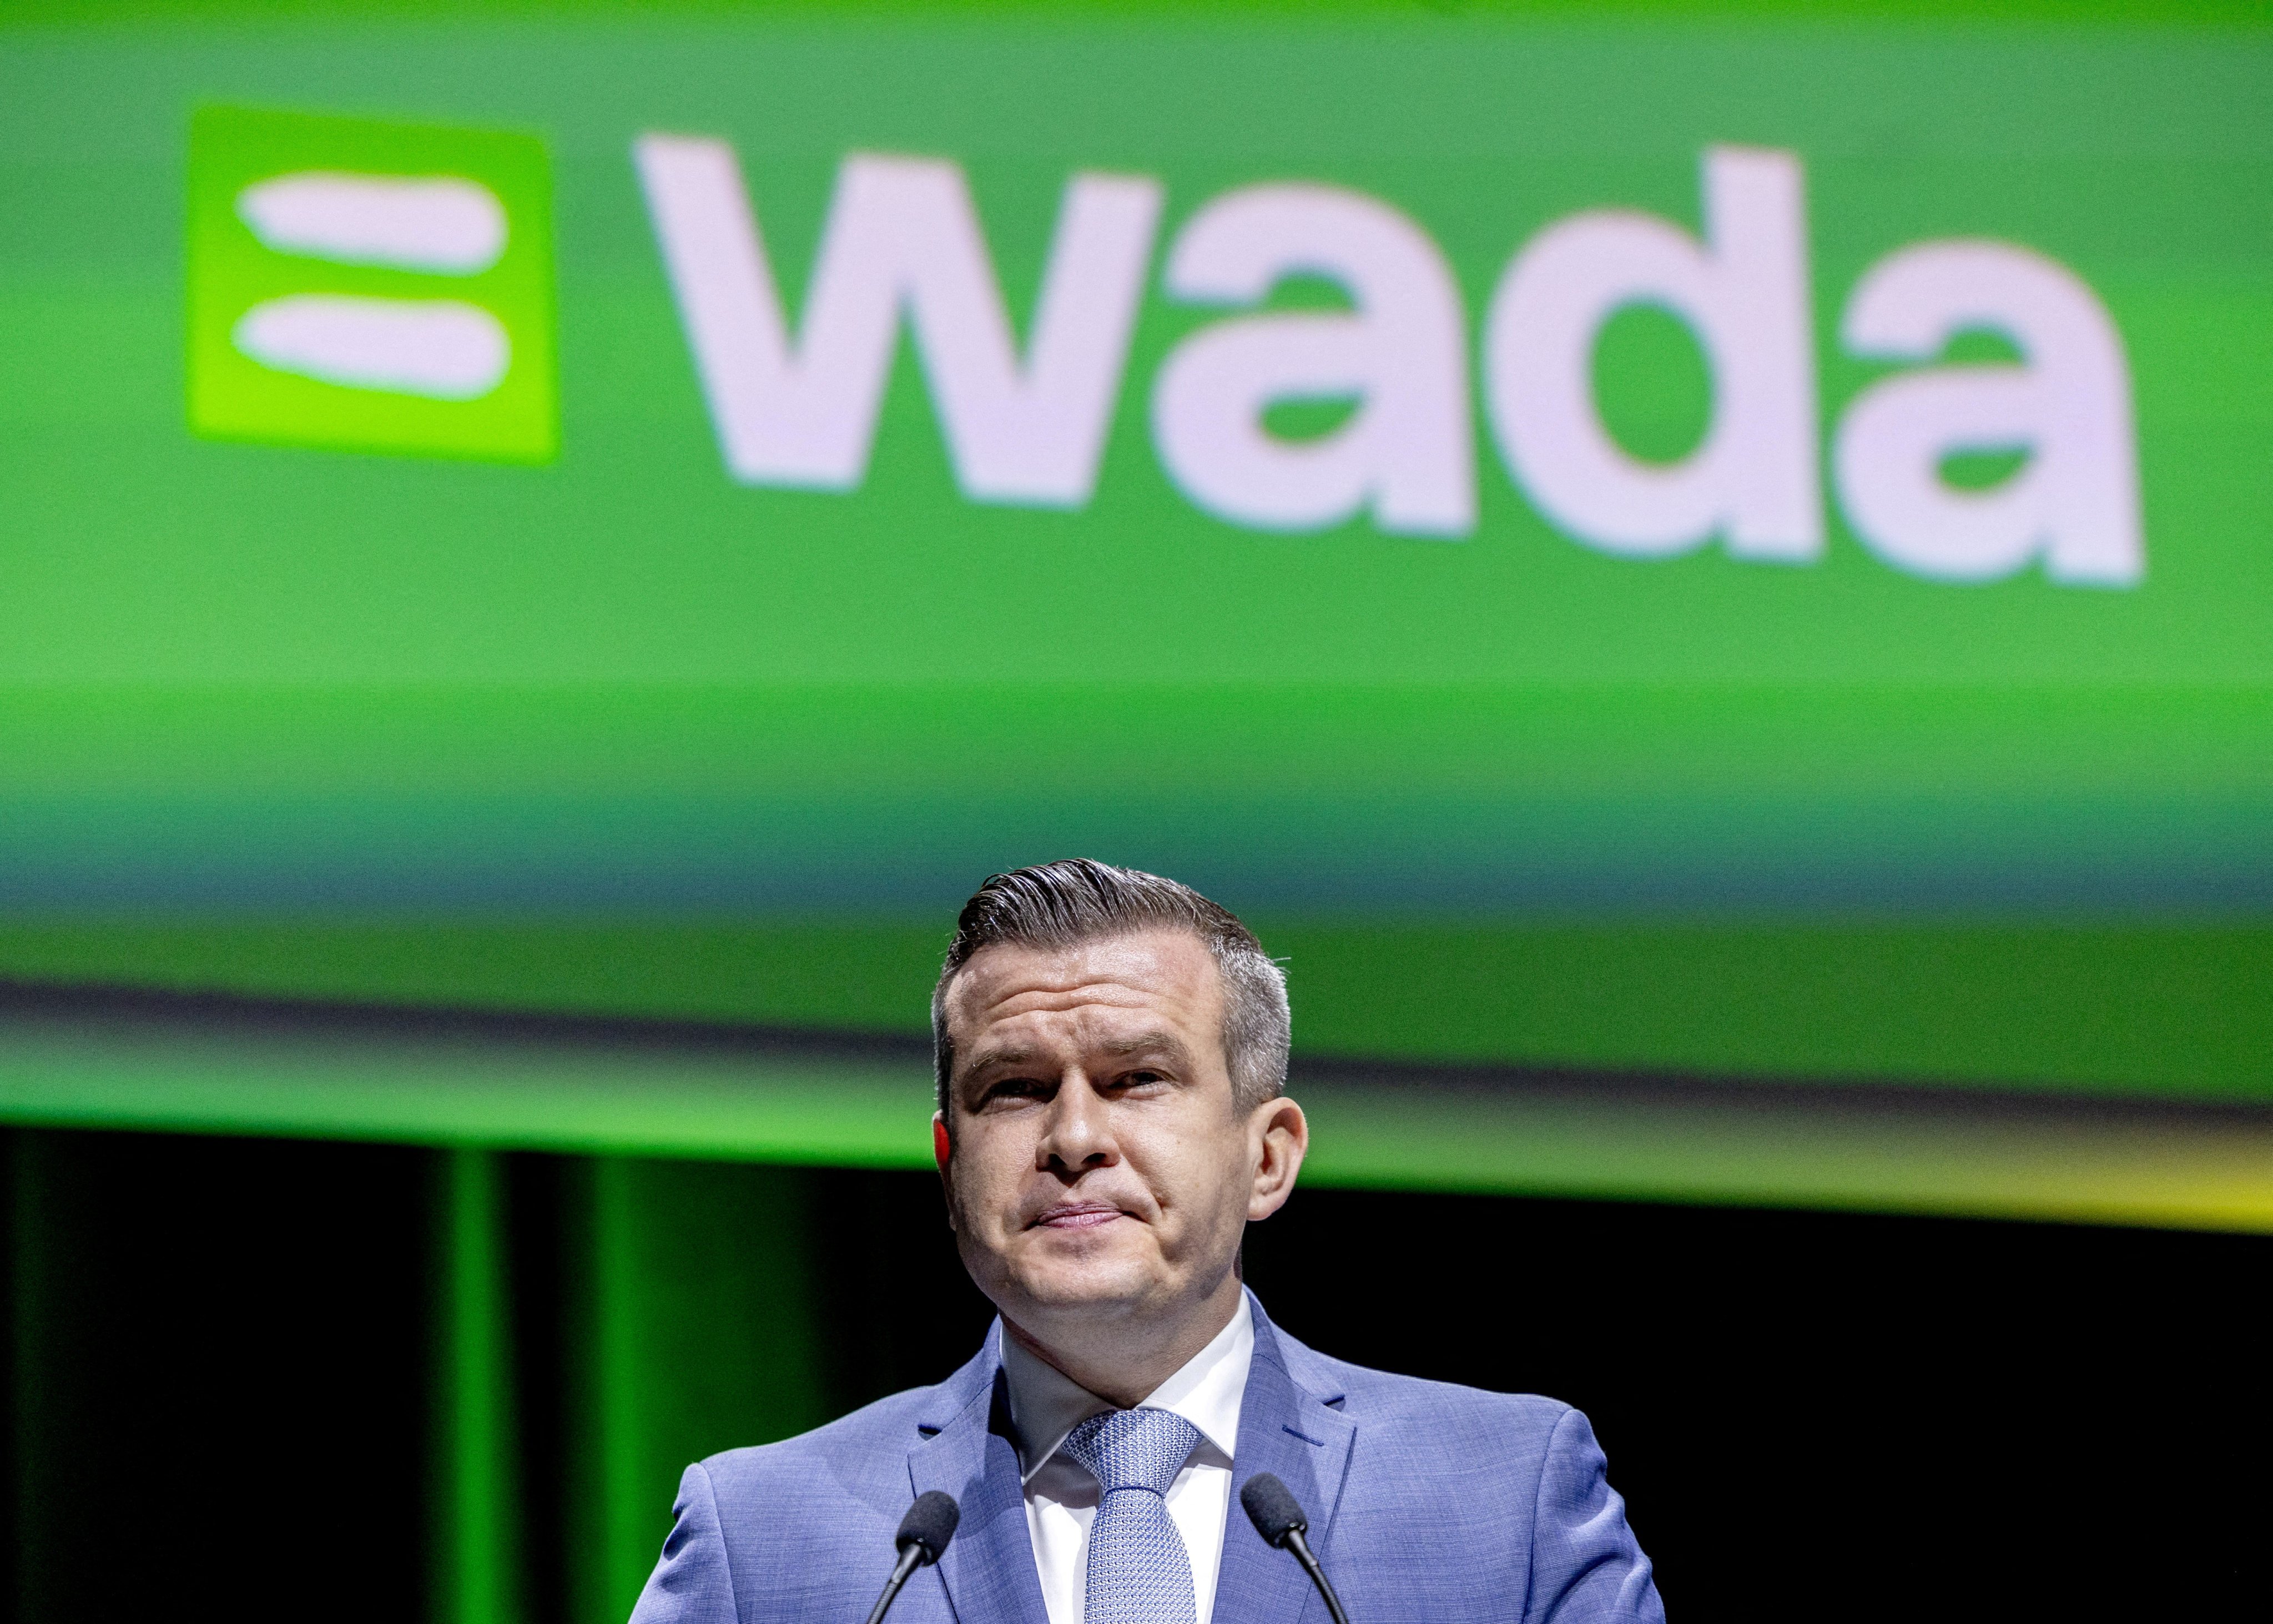 World Anti-Doping Agency president Witold Banka says the organisation’s  integrity and reputation is under attack. Photo: Reuters